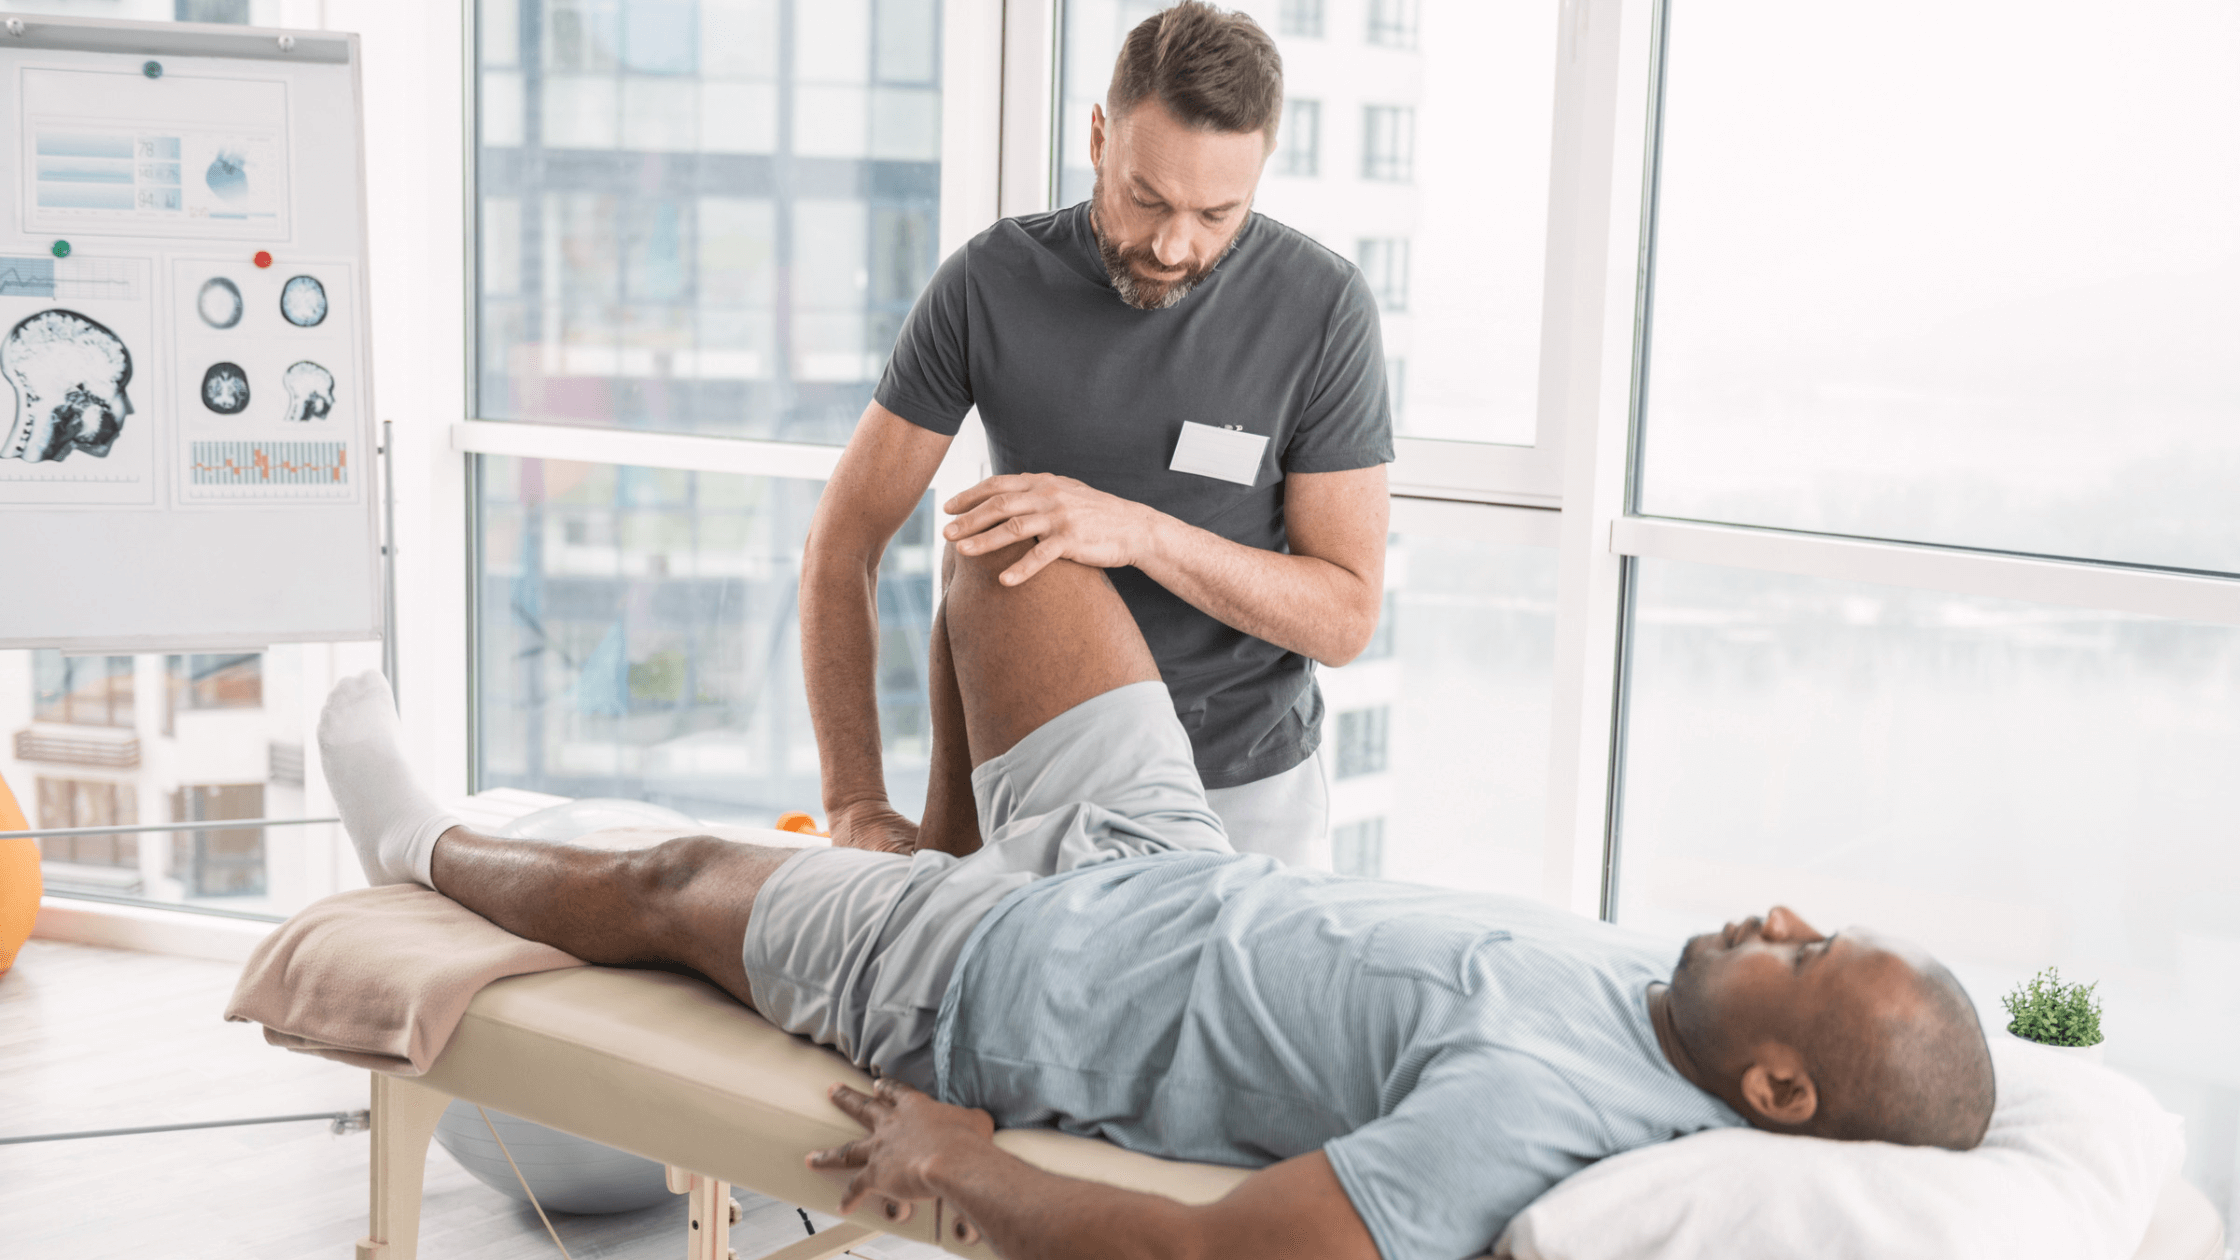 Want To Be a Physical Therapist? You Need These 8 Personal Qualities